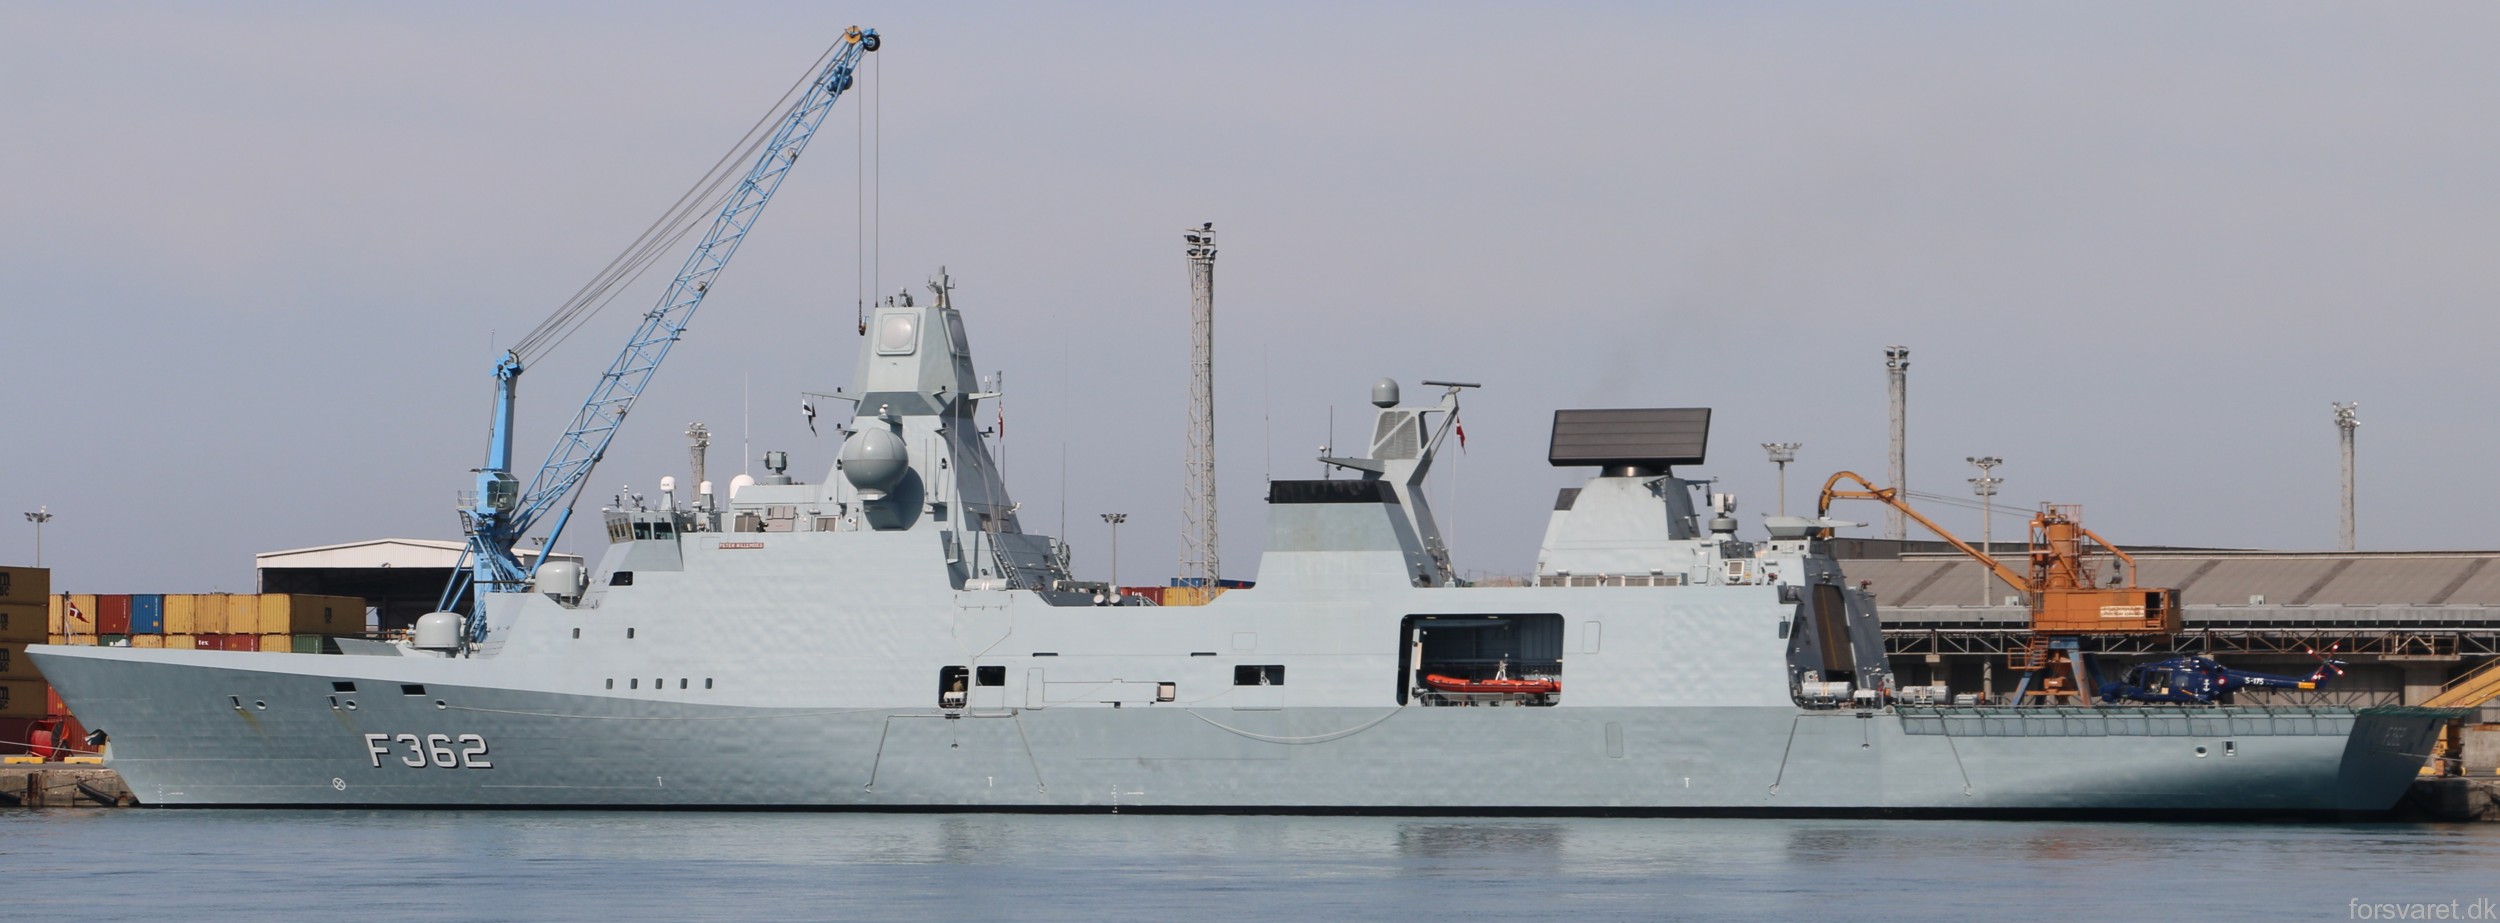 f-362 hdms peter willemoes iver huitfeldt class guided missile frigate ffg royal danish navy 29